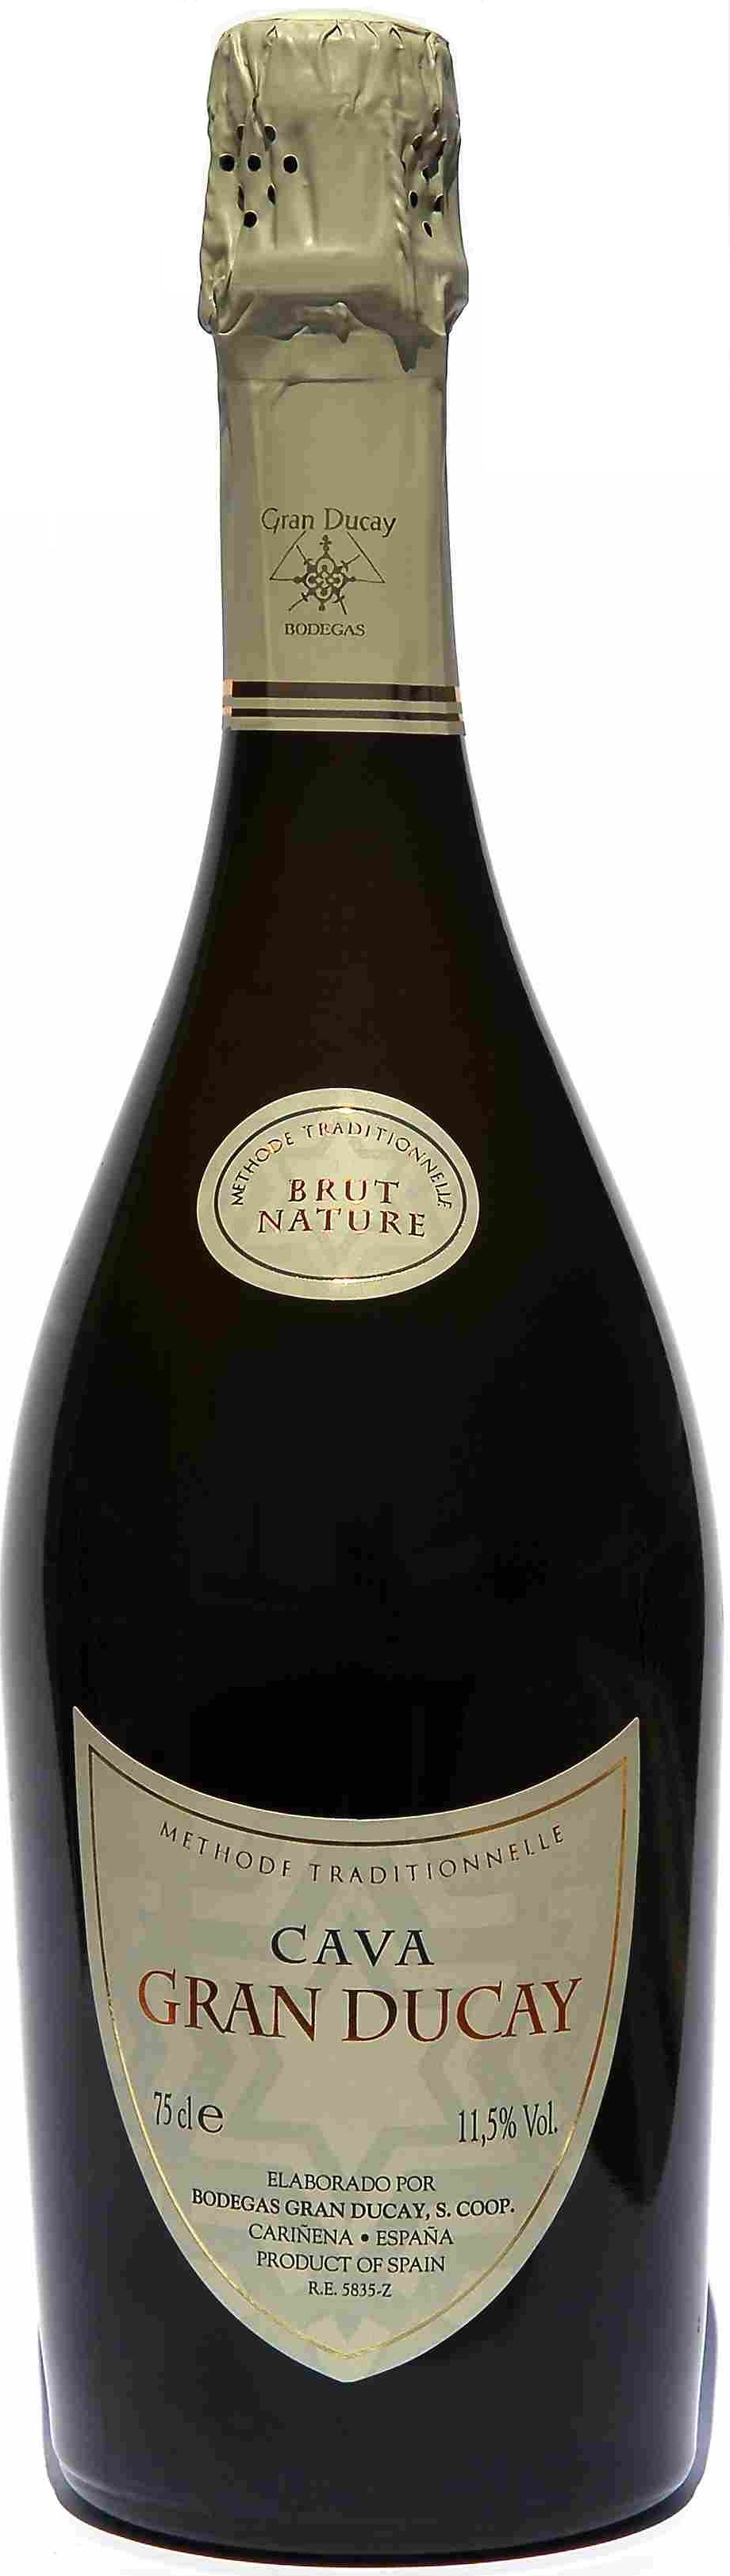 Gran Ducay Brut Nature The Essence of Wine